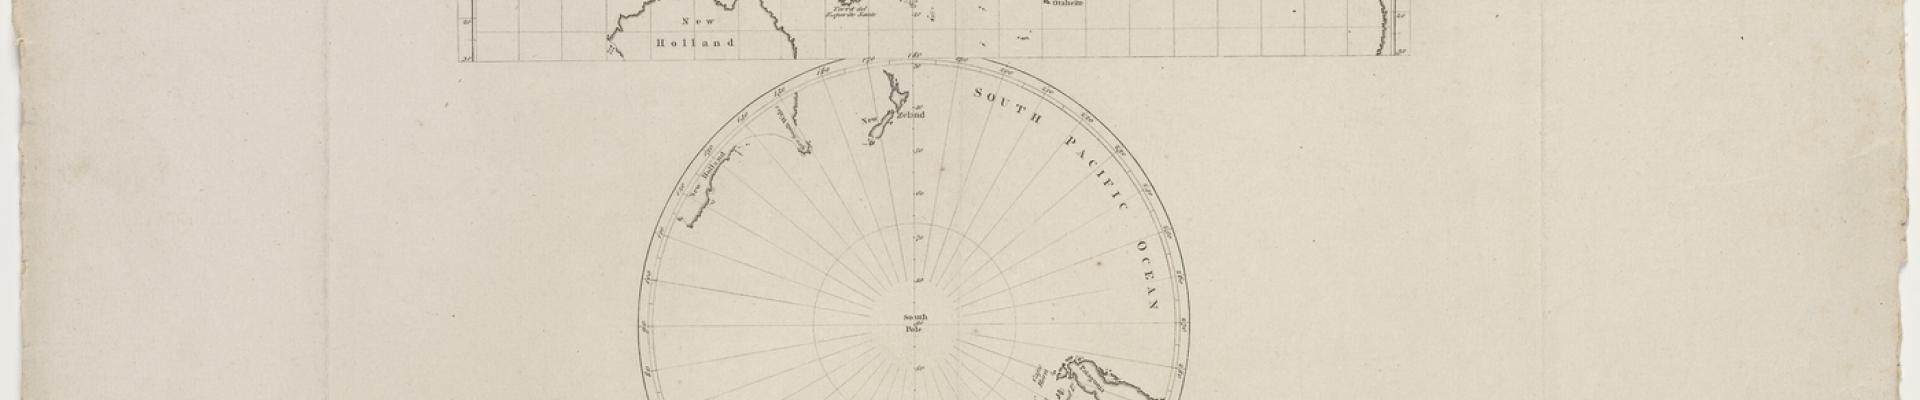 james cook's three voyages of exploration